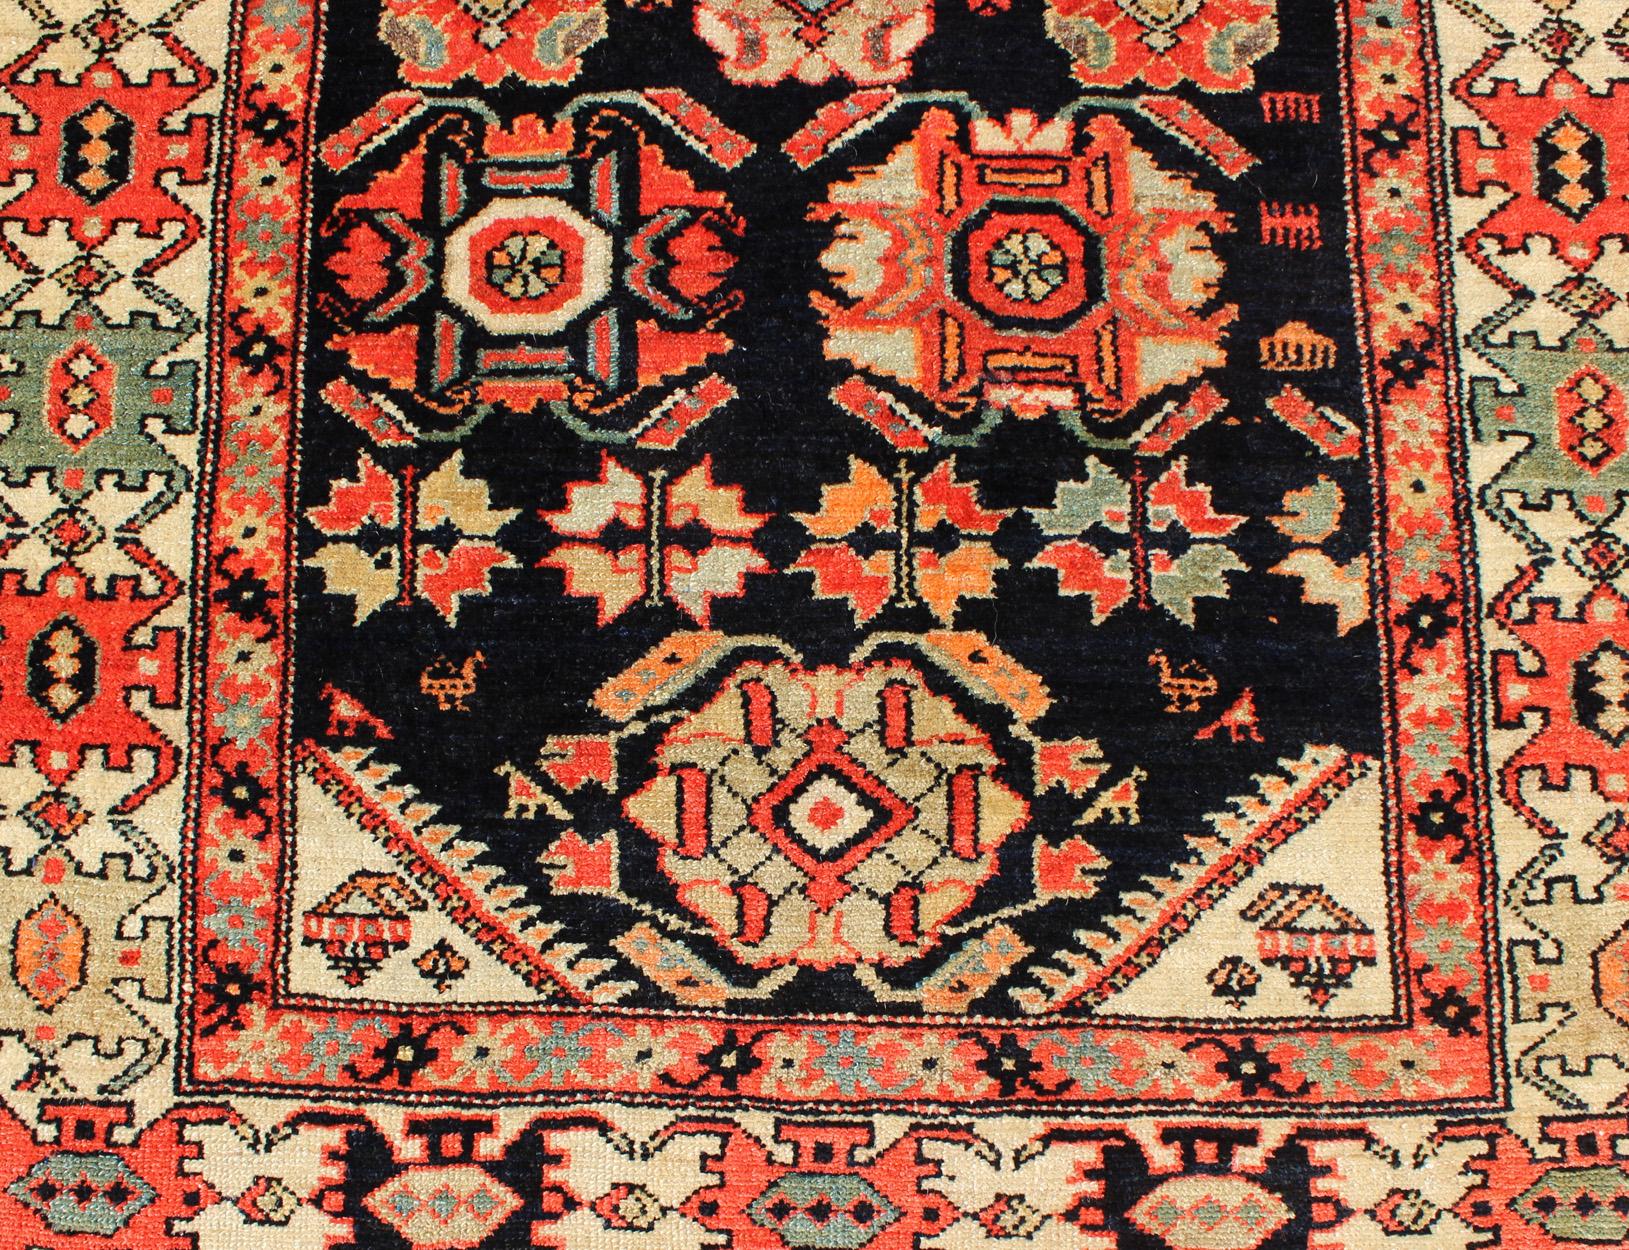 Sub-Geometric Antique Persian Malayer Runner in Onyx and Orange Tones For Sale 1